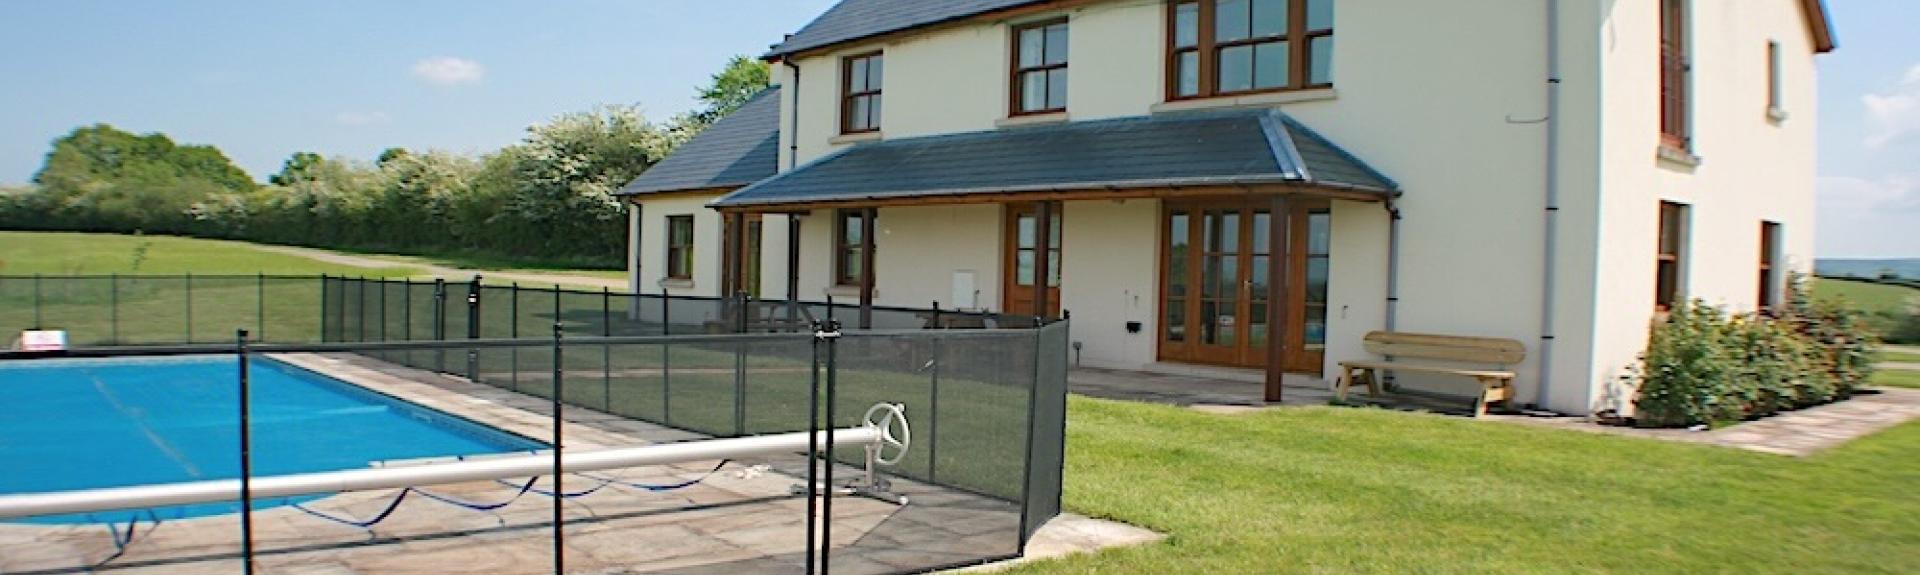 A fenced-in outdoor pool on a lawn overlooked by a large holiday cottage.